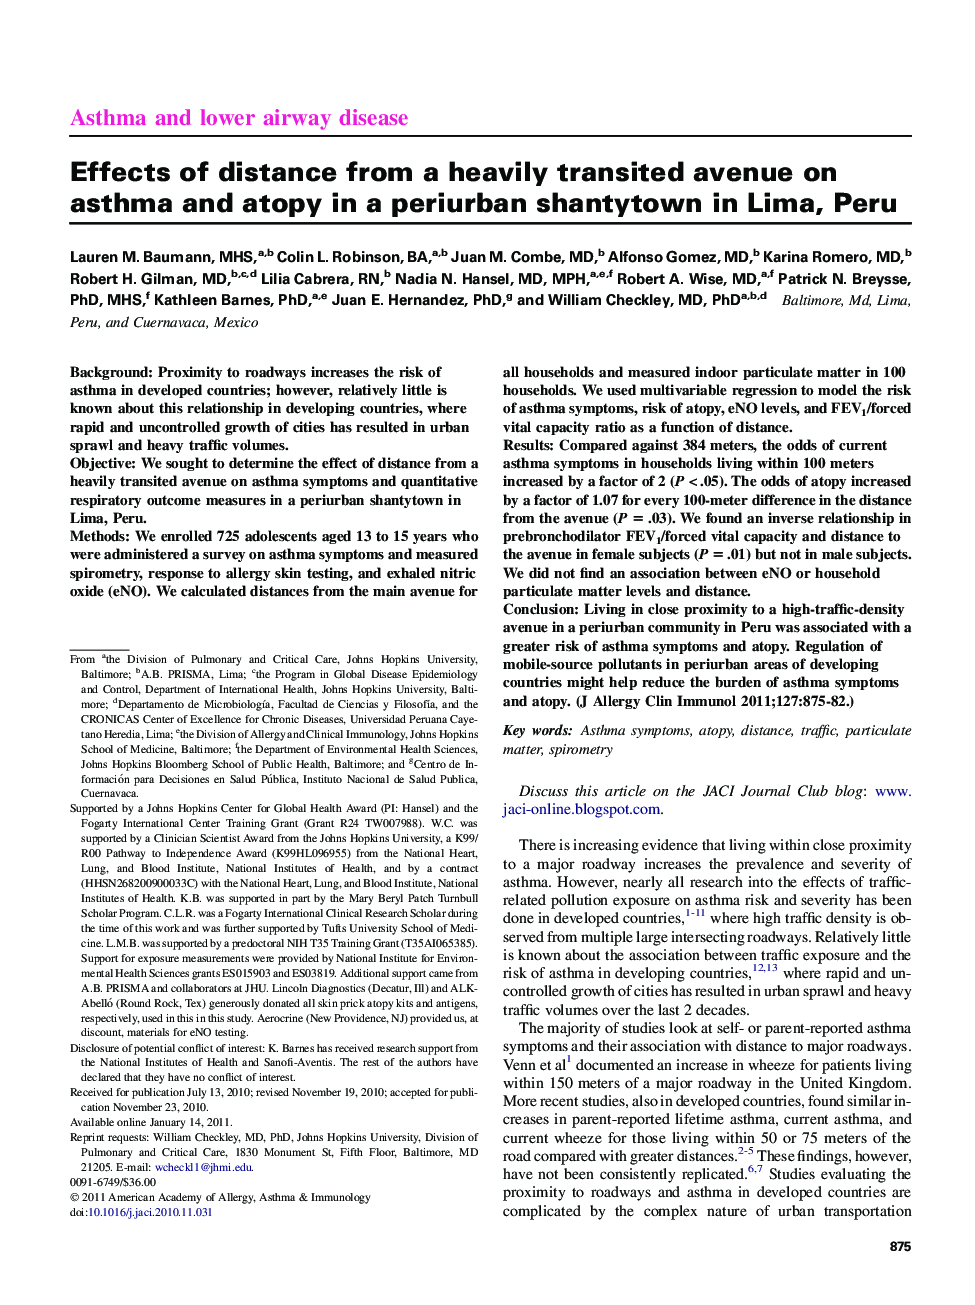 Effects of distance from a heavily transited avenue on asthma and atopy in a periurban shantytown in Lima, Peru 